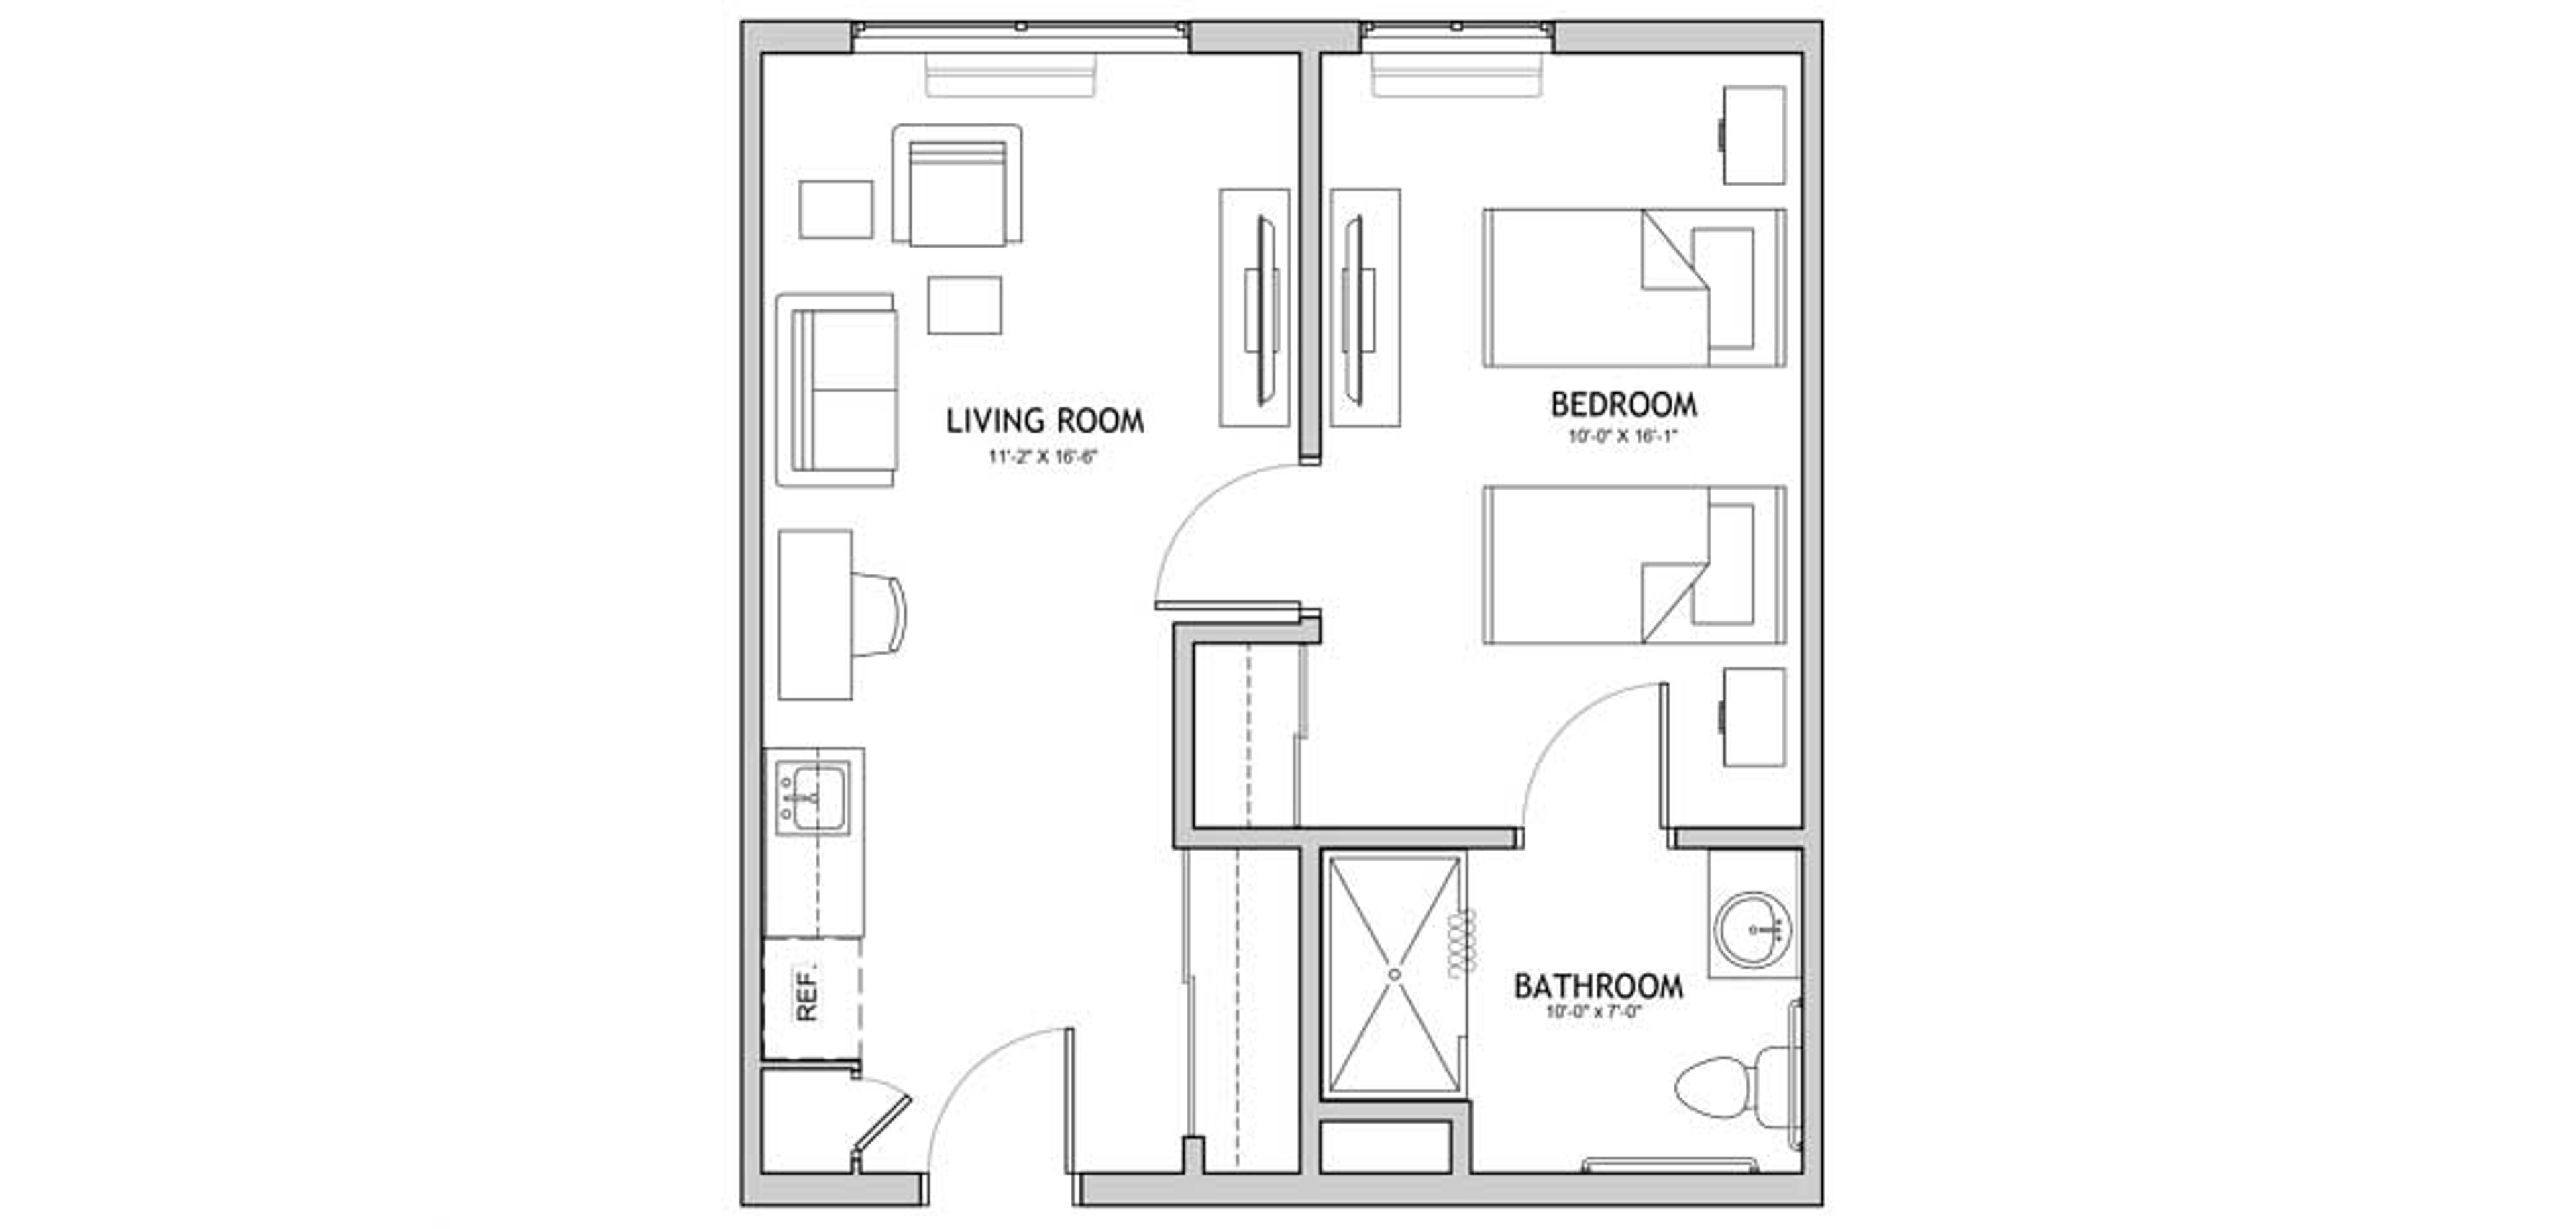 Floorplan - The Auberge at North Ogden - 1 bed, 1 bath, 640 sq. ft. Assisted Living